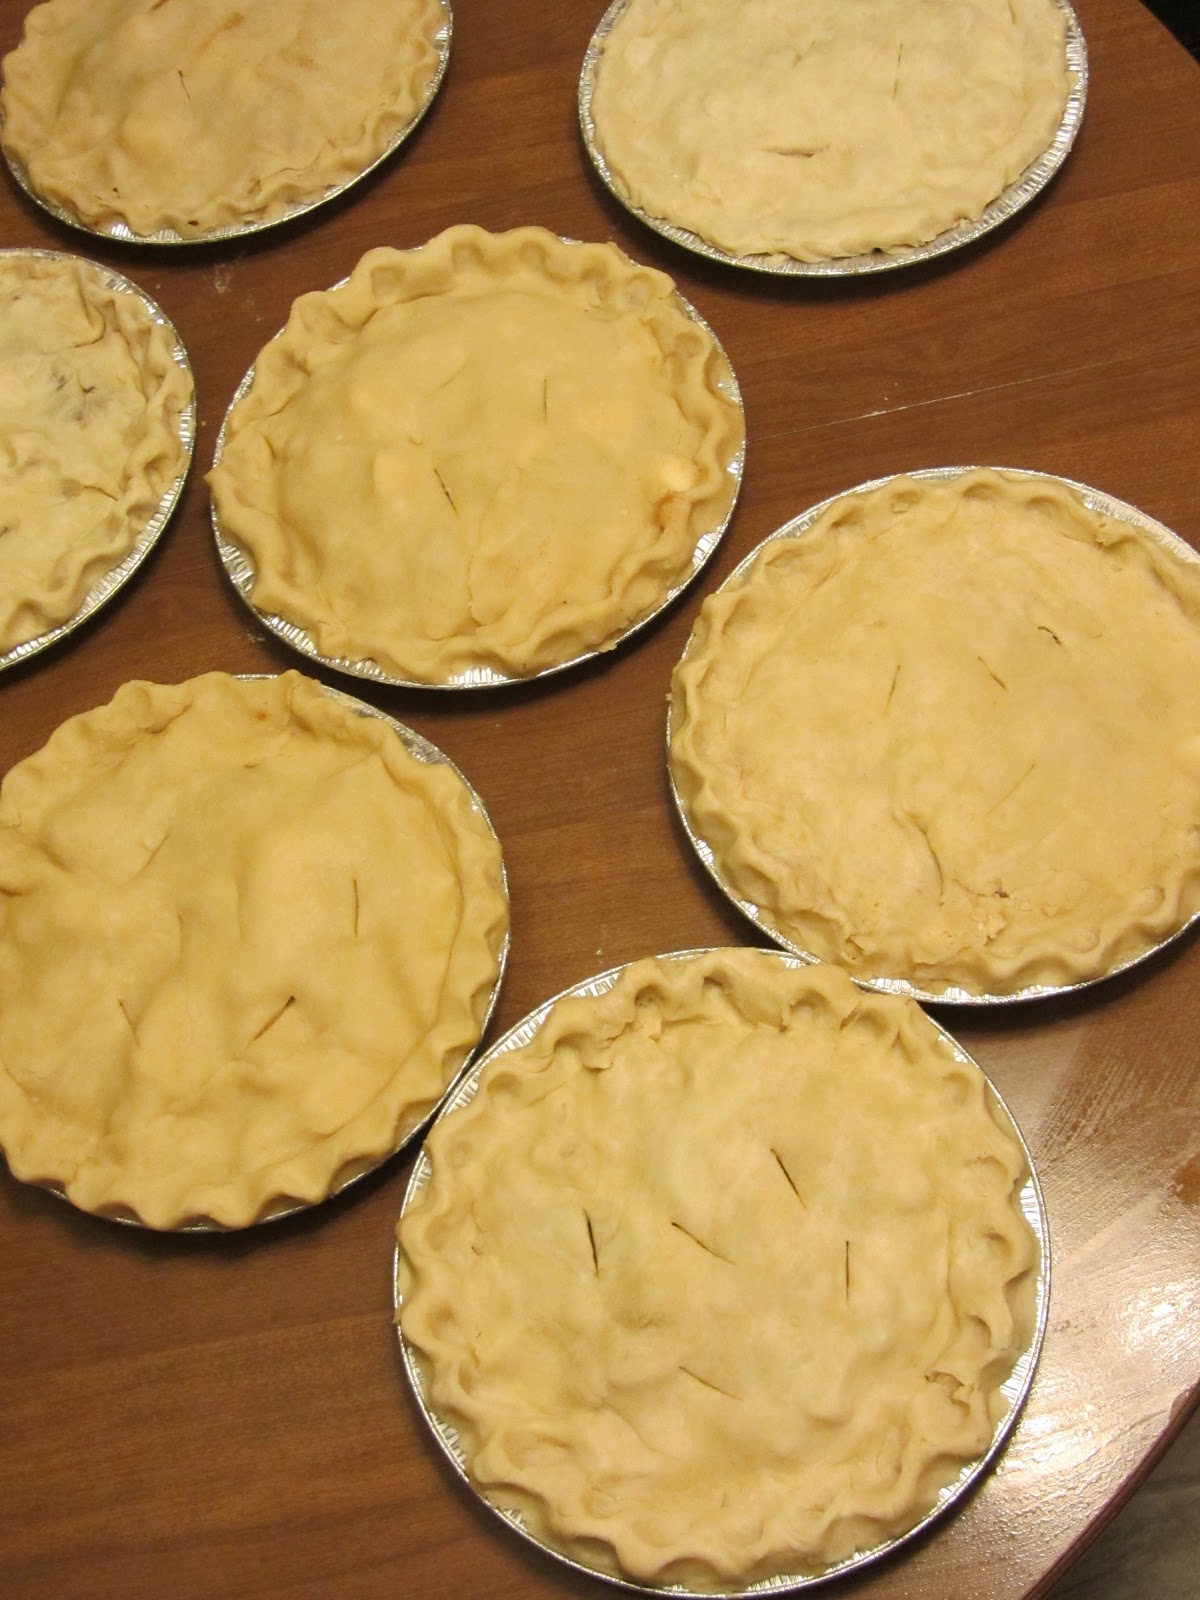 Been There Baked That: Apple Pies for the Freezer